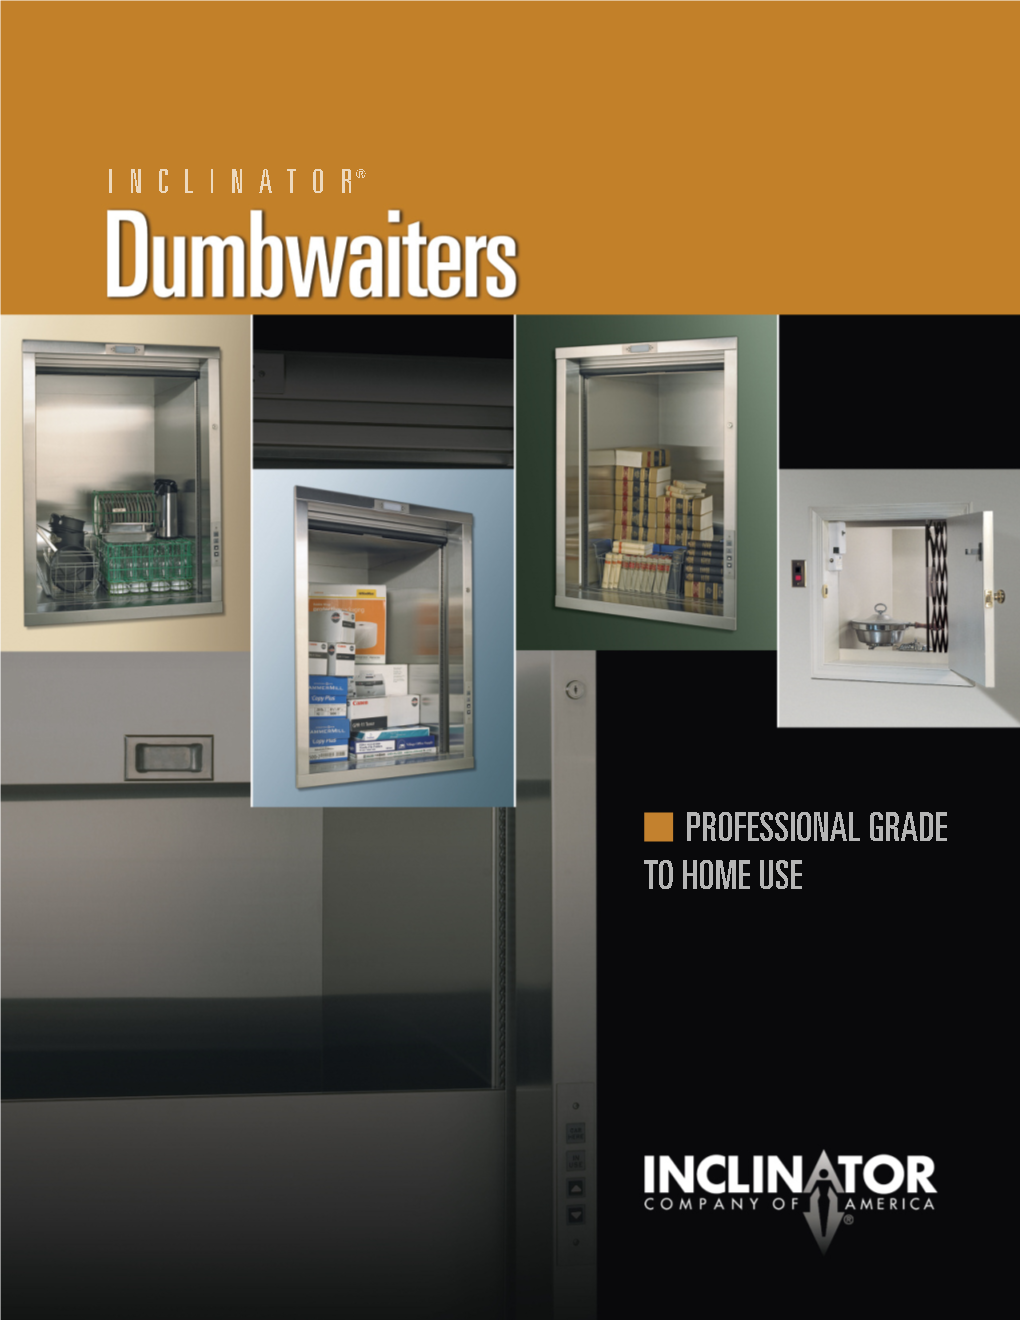 Dumbwaiters for Homes, Offices, Medical Practices, Stores, Restaurants, Banks, Libraries and Many Other Applications